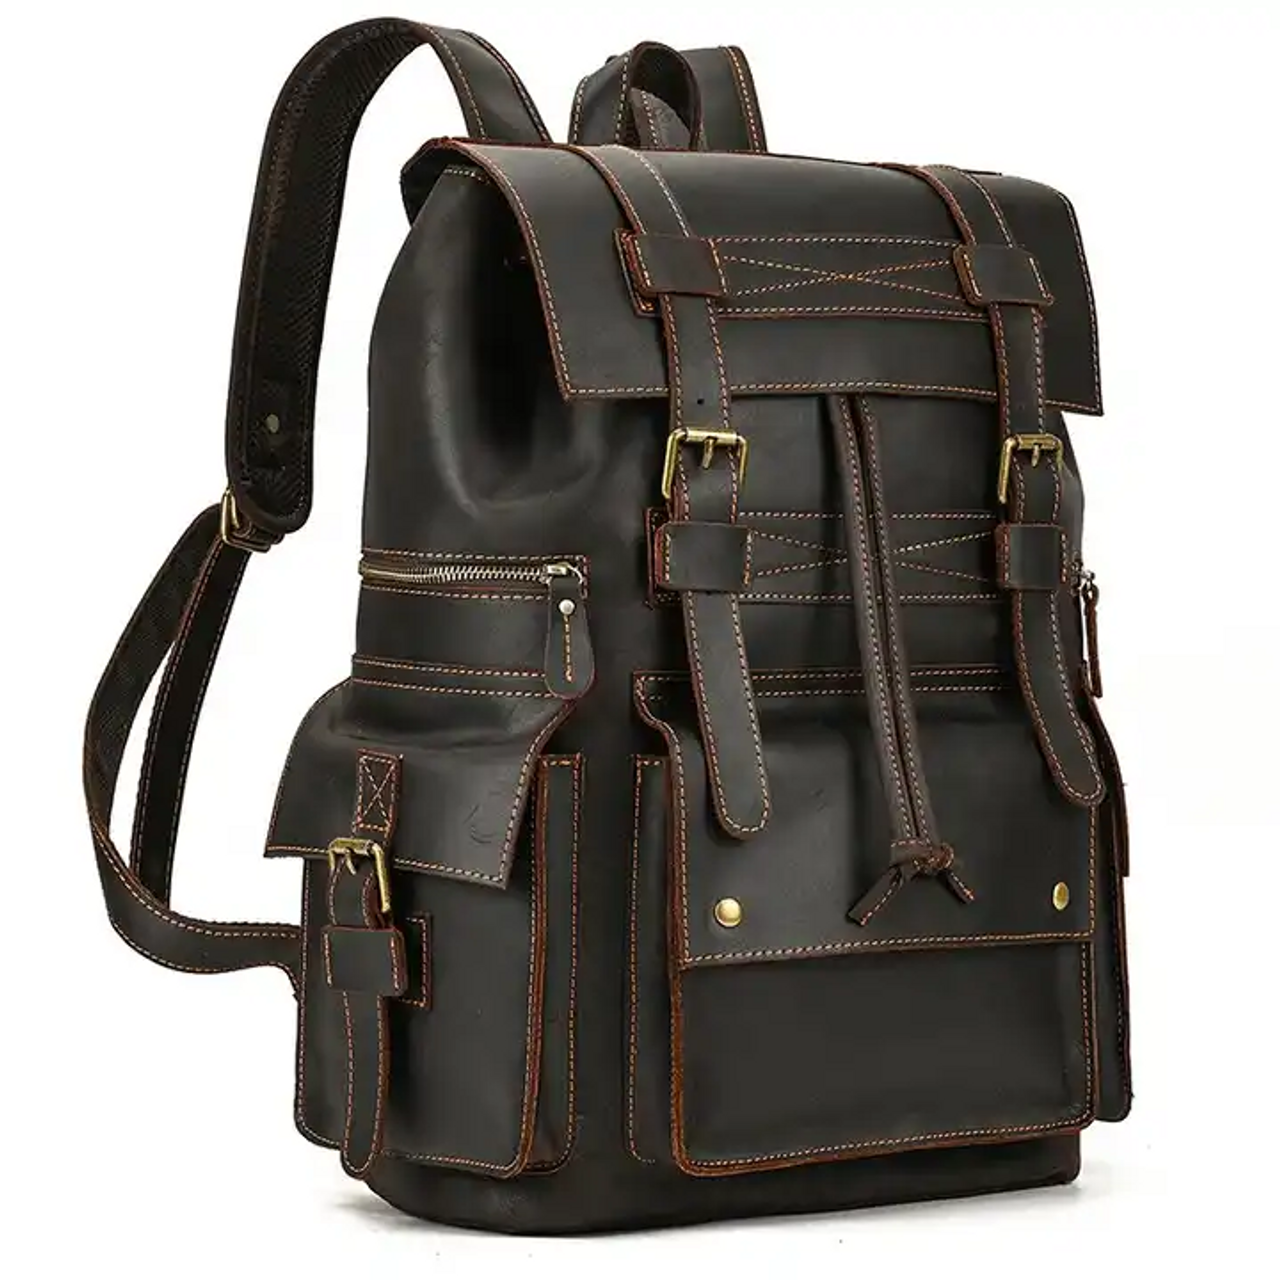 Large Capacity 17 Inch Laptop Vintage Look Crazy Horse Leather Travel Backpack